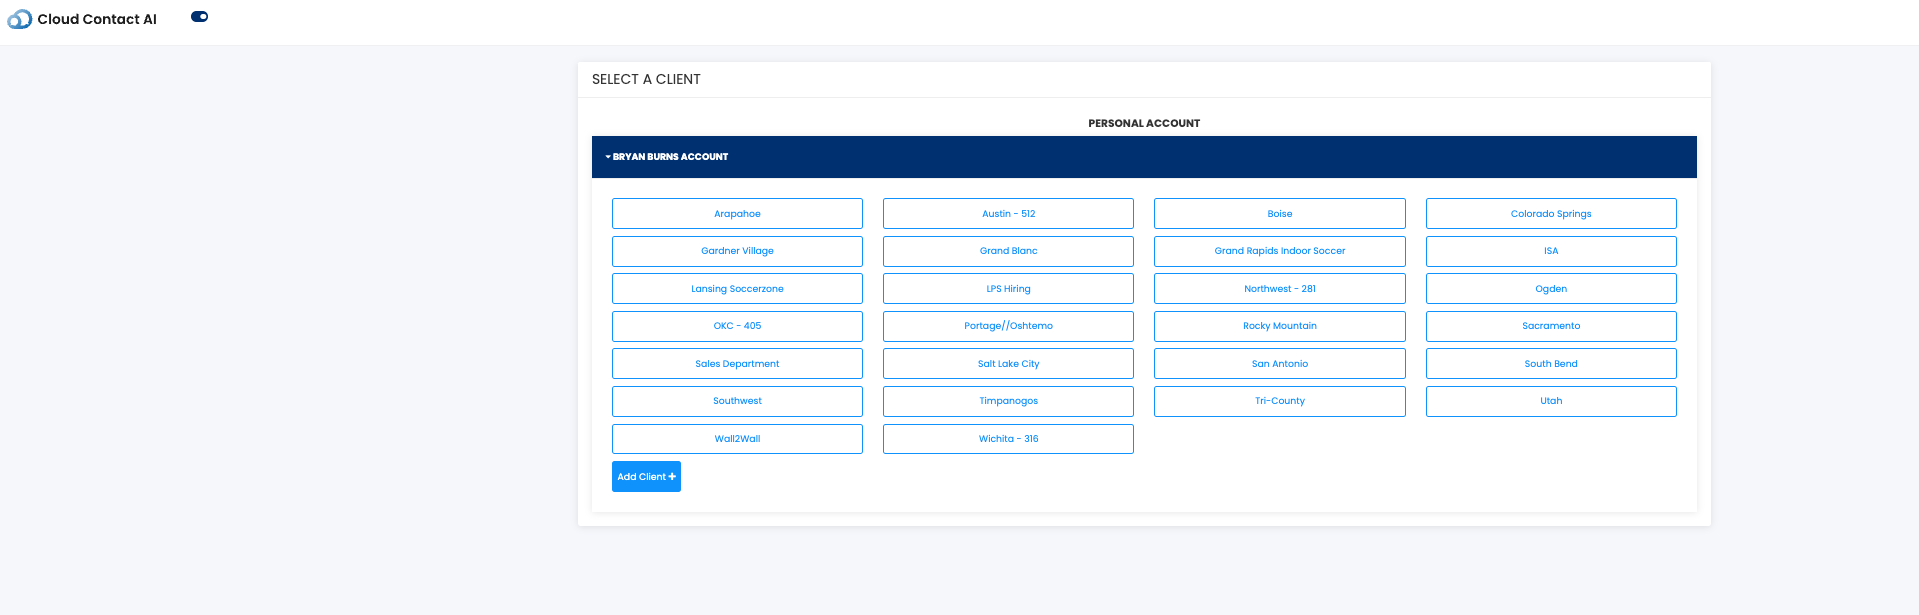 The administrator has the ability to provision clients within the platform. Each client can have unique phone numbers and inbound email addresses. Each client functions as a tenant. Each client has their own inbox, contact information, and campaigns.